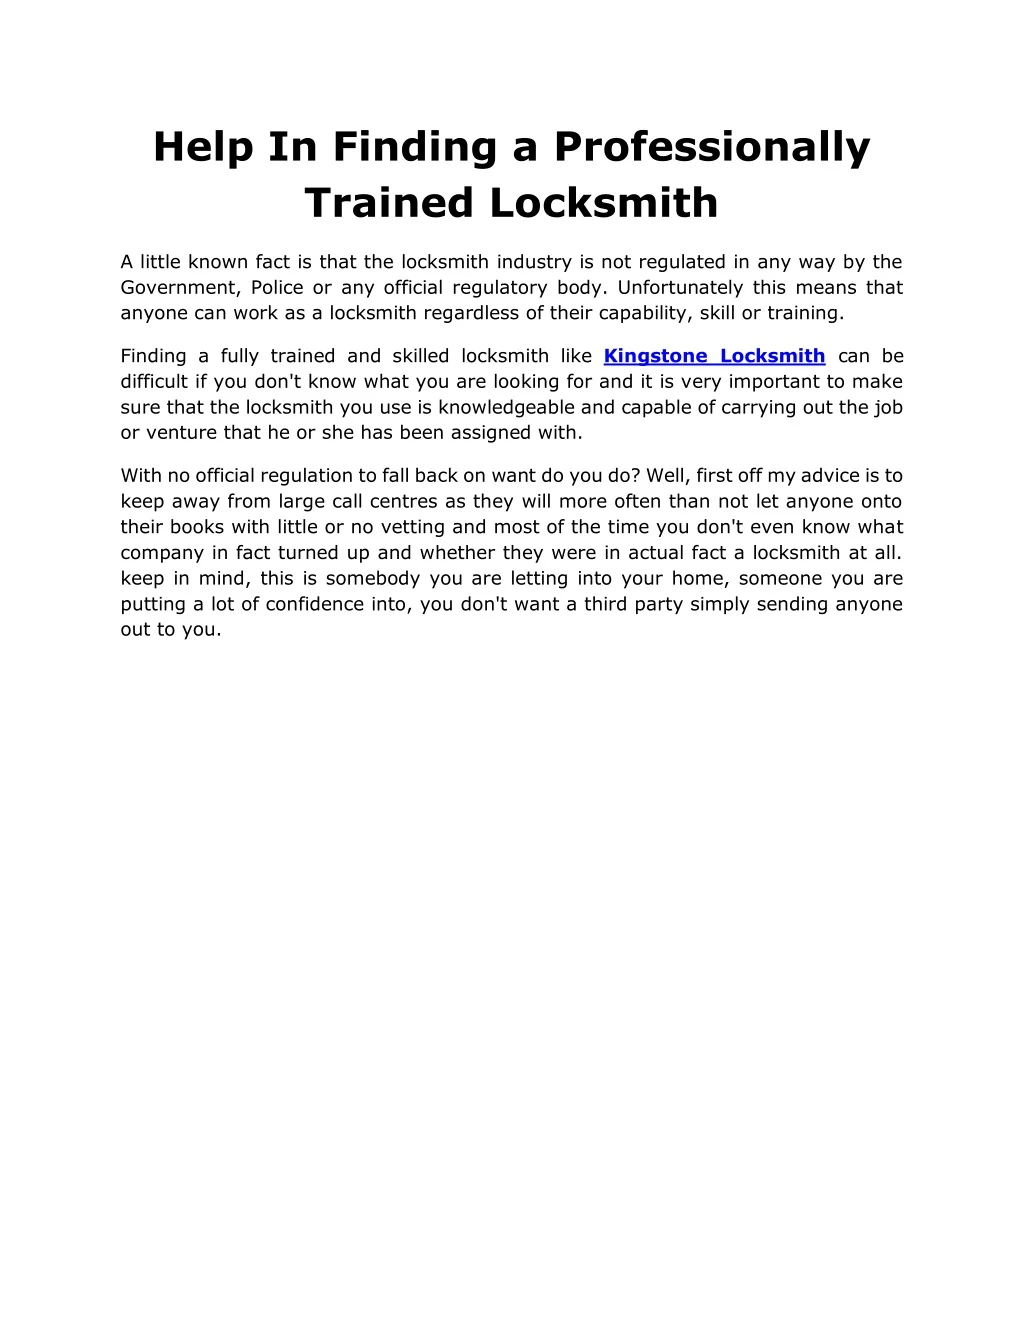 help in finding a professionally trained locksmith